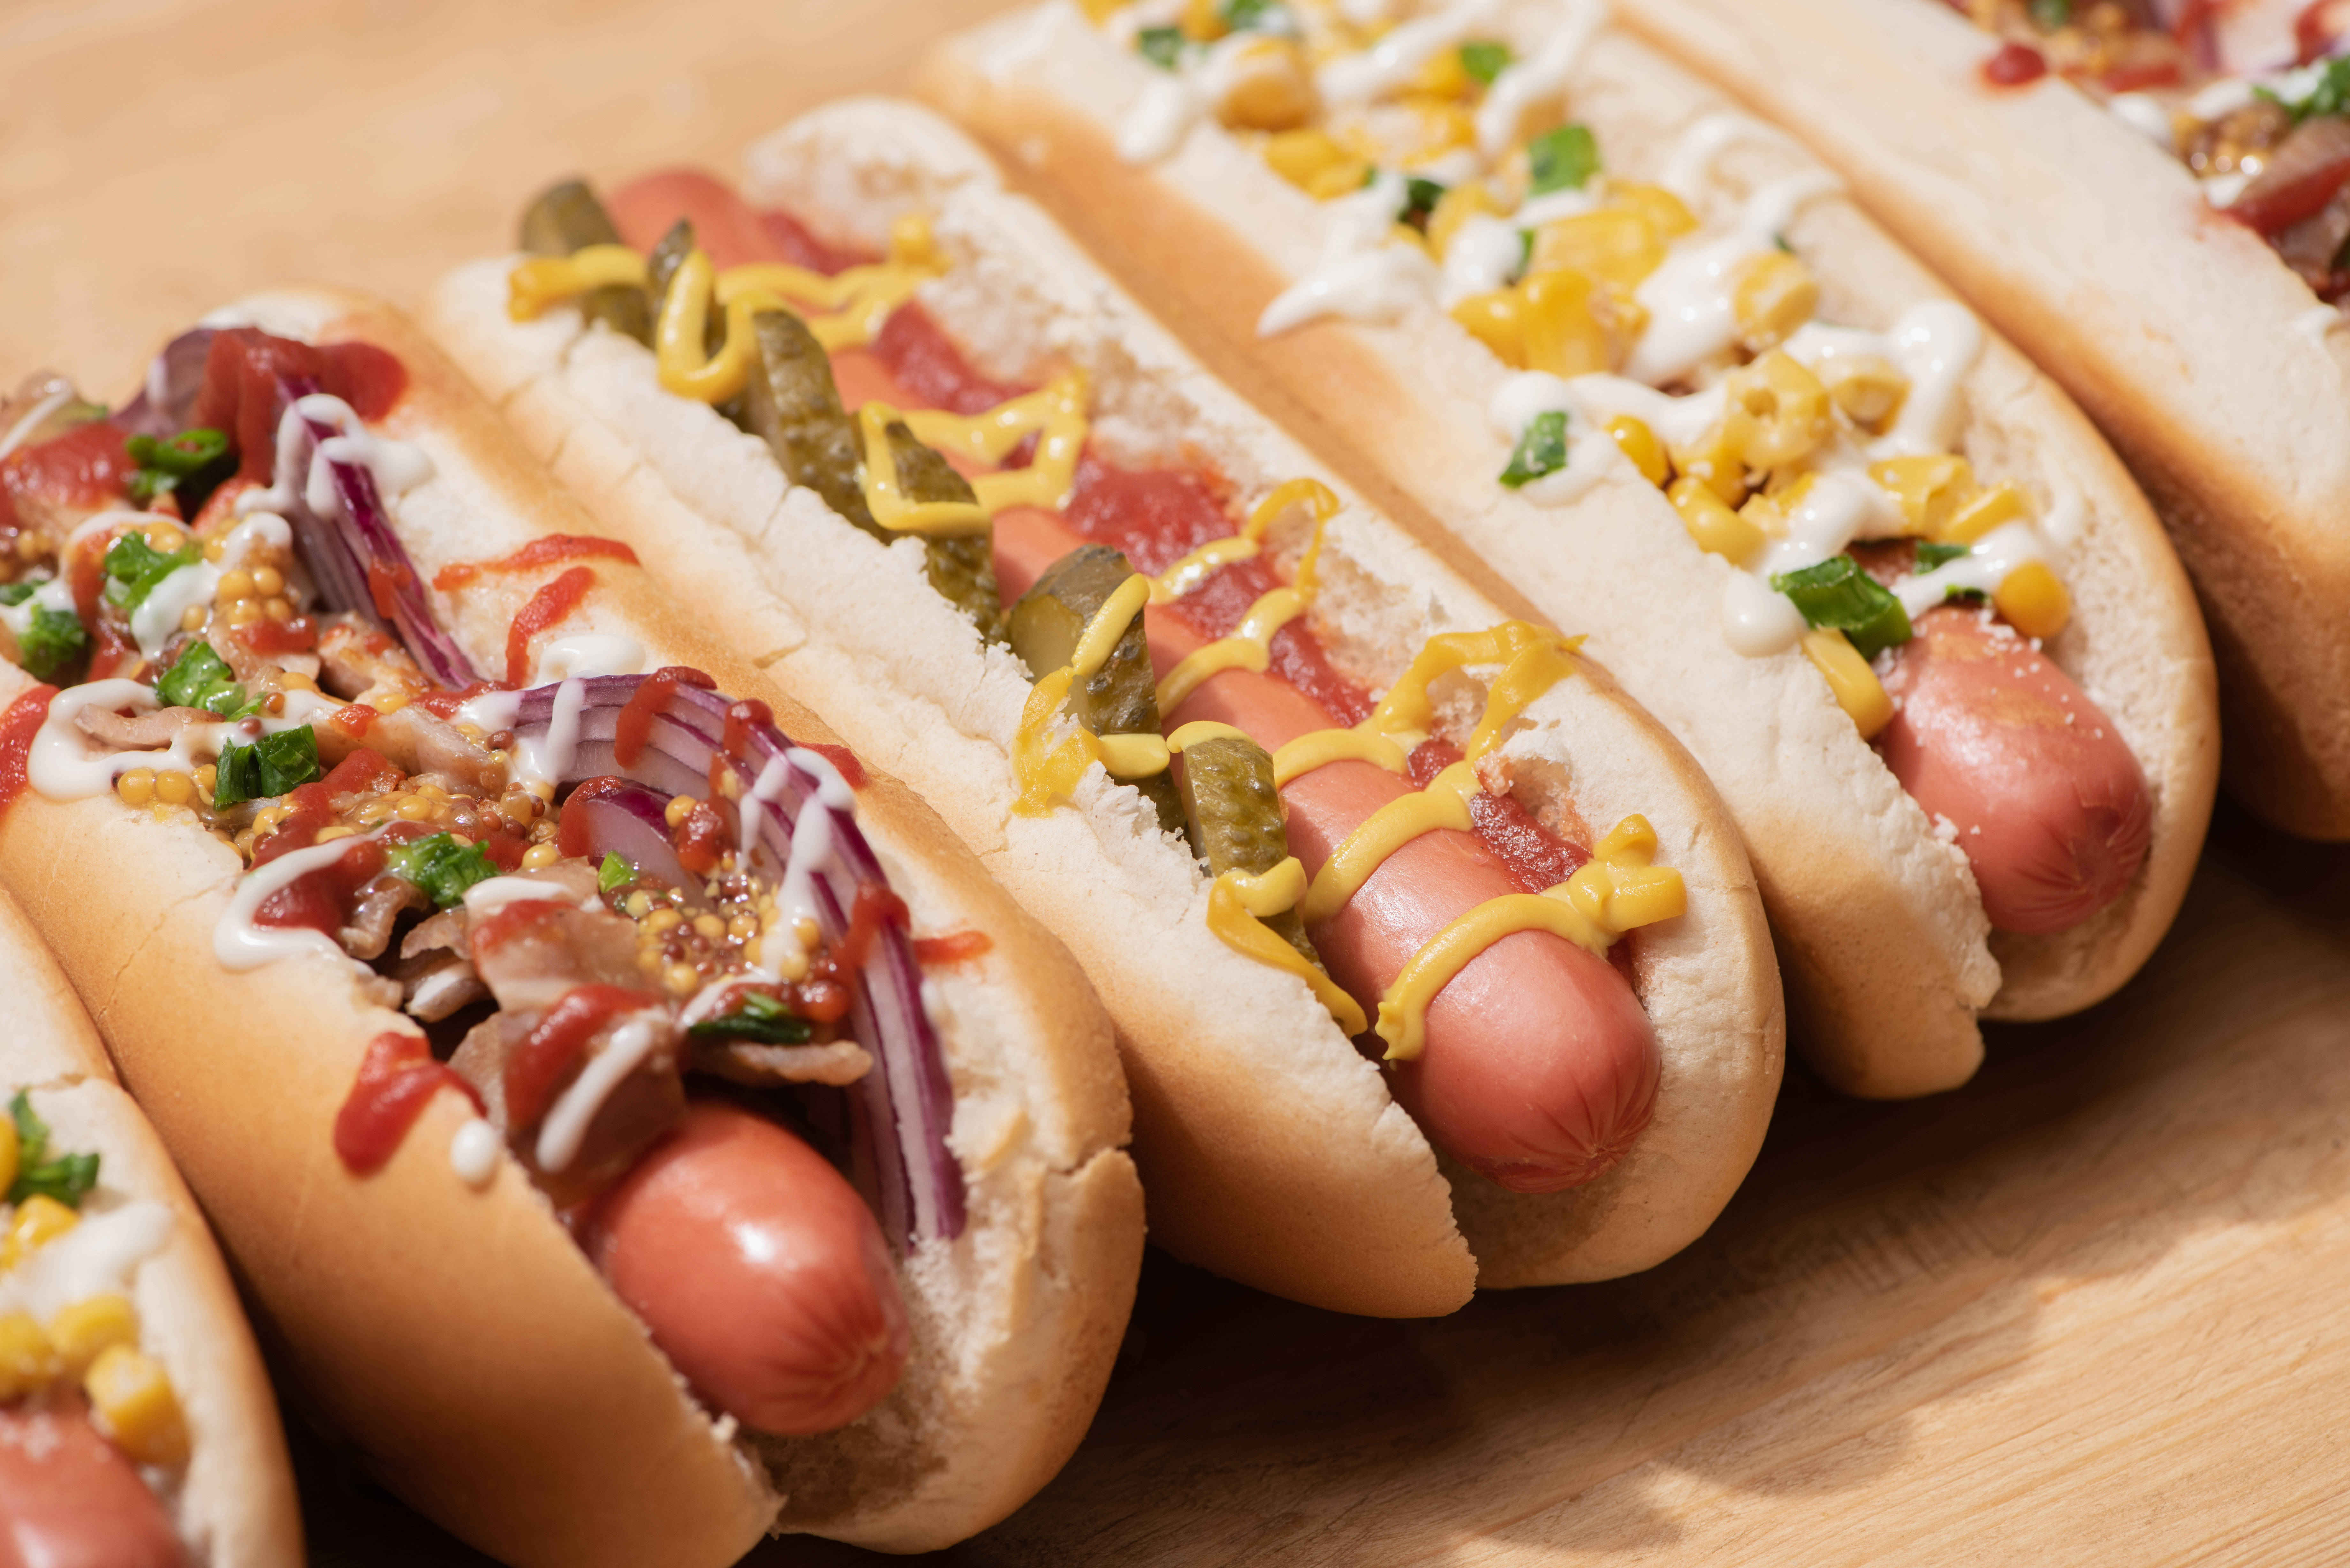 Visit the Yummy Casey’s Corner at Disney’s Magic Kingdom with Your Family - Hot Dogs